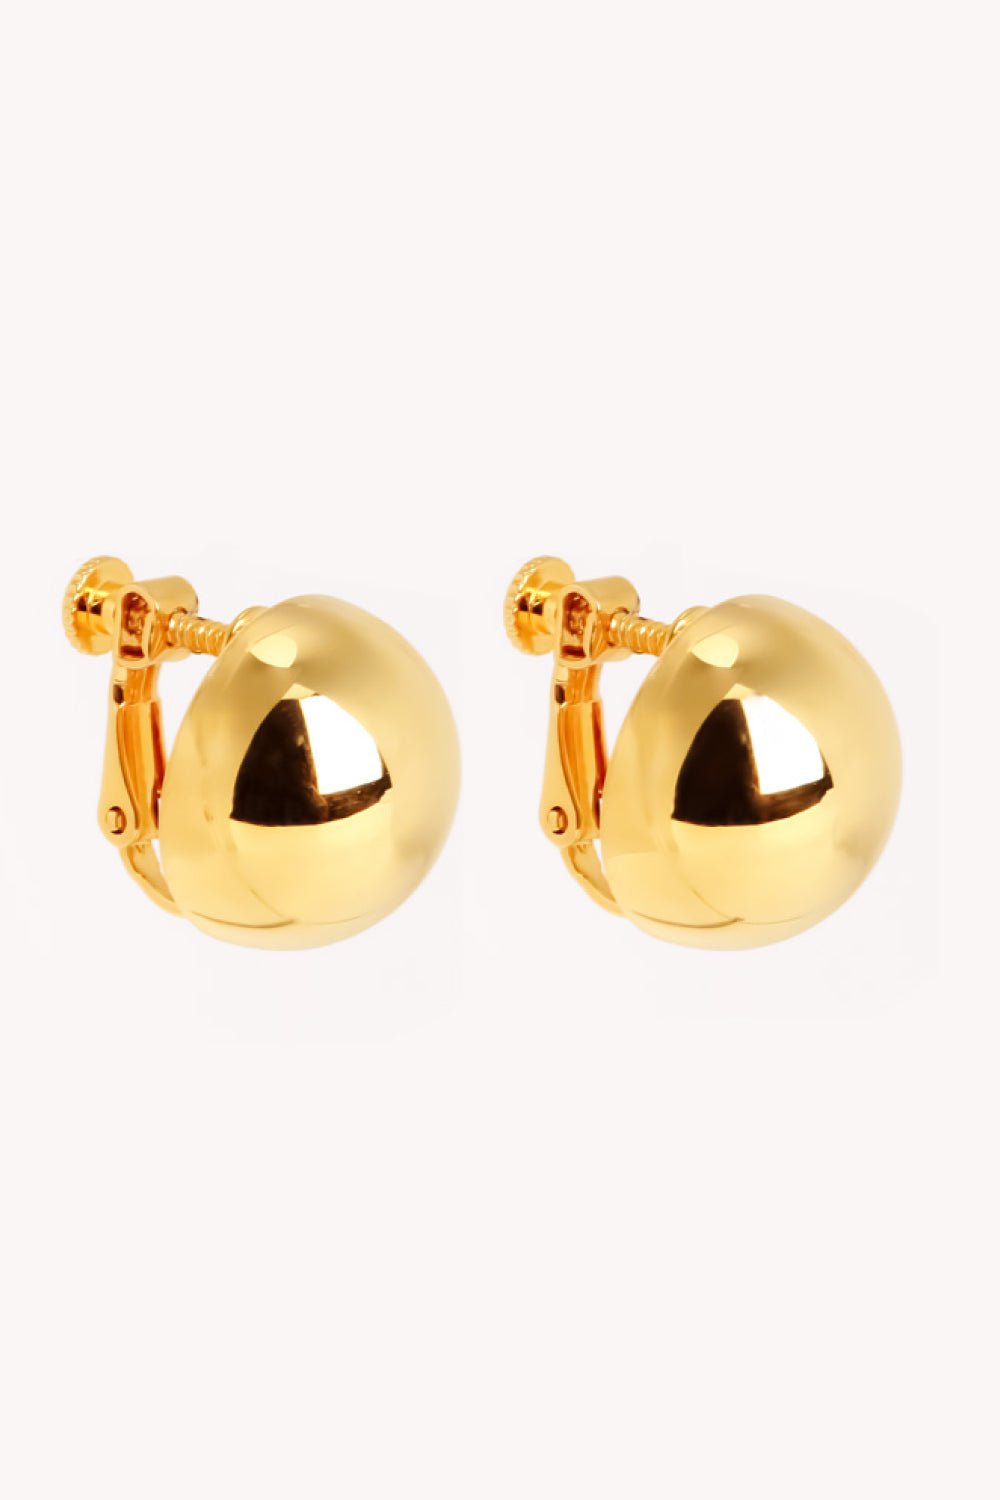 18K Gold Plated Ball Stud Earrings - TJ Outlet